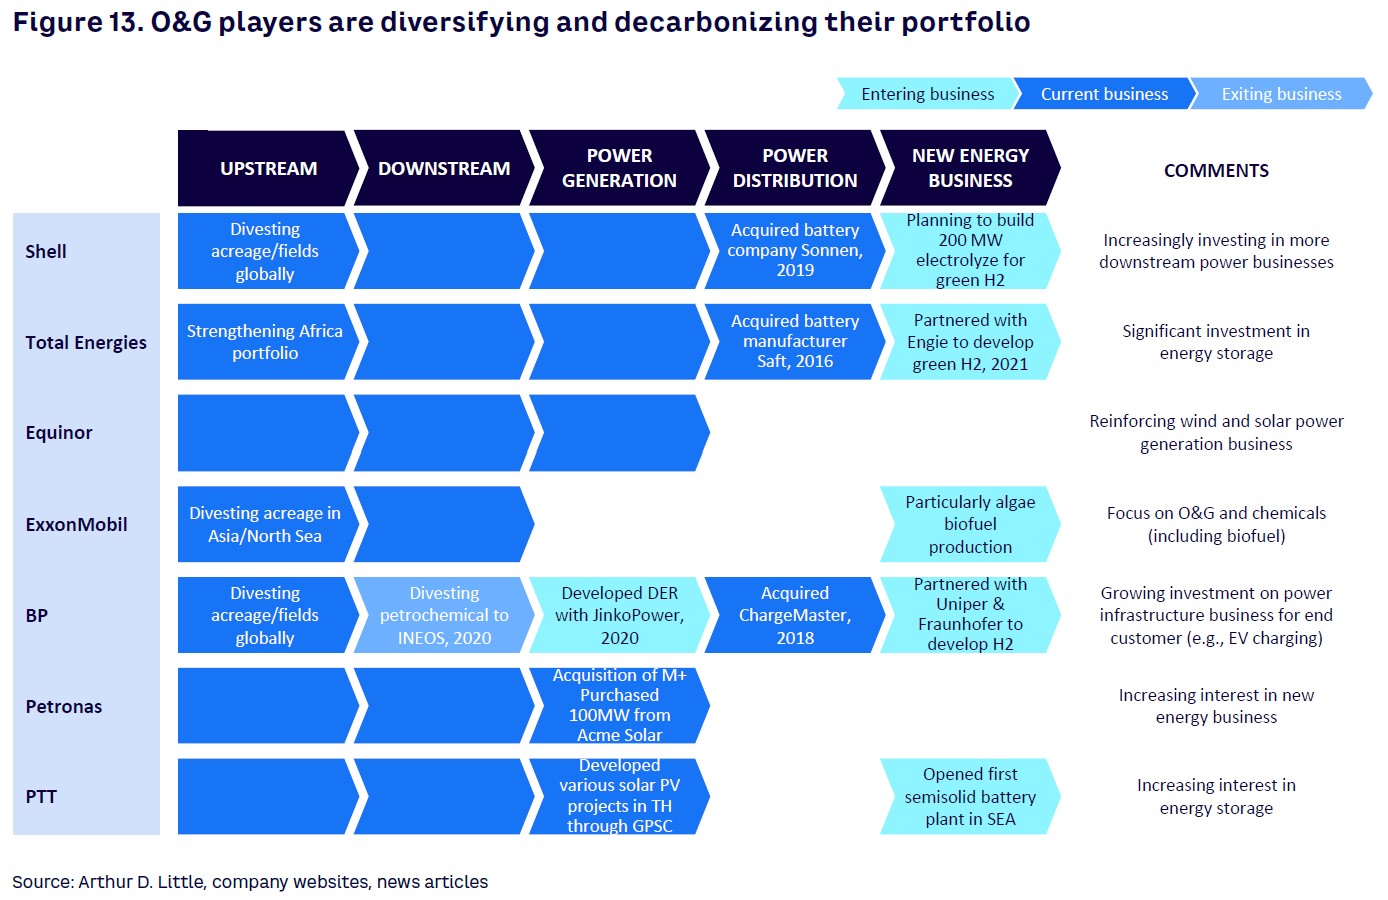 Figure 13. O&G players are diversifying and decarbonizing their portfolio